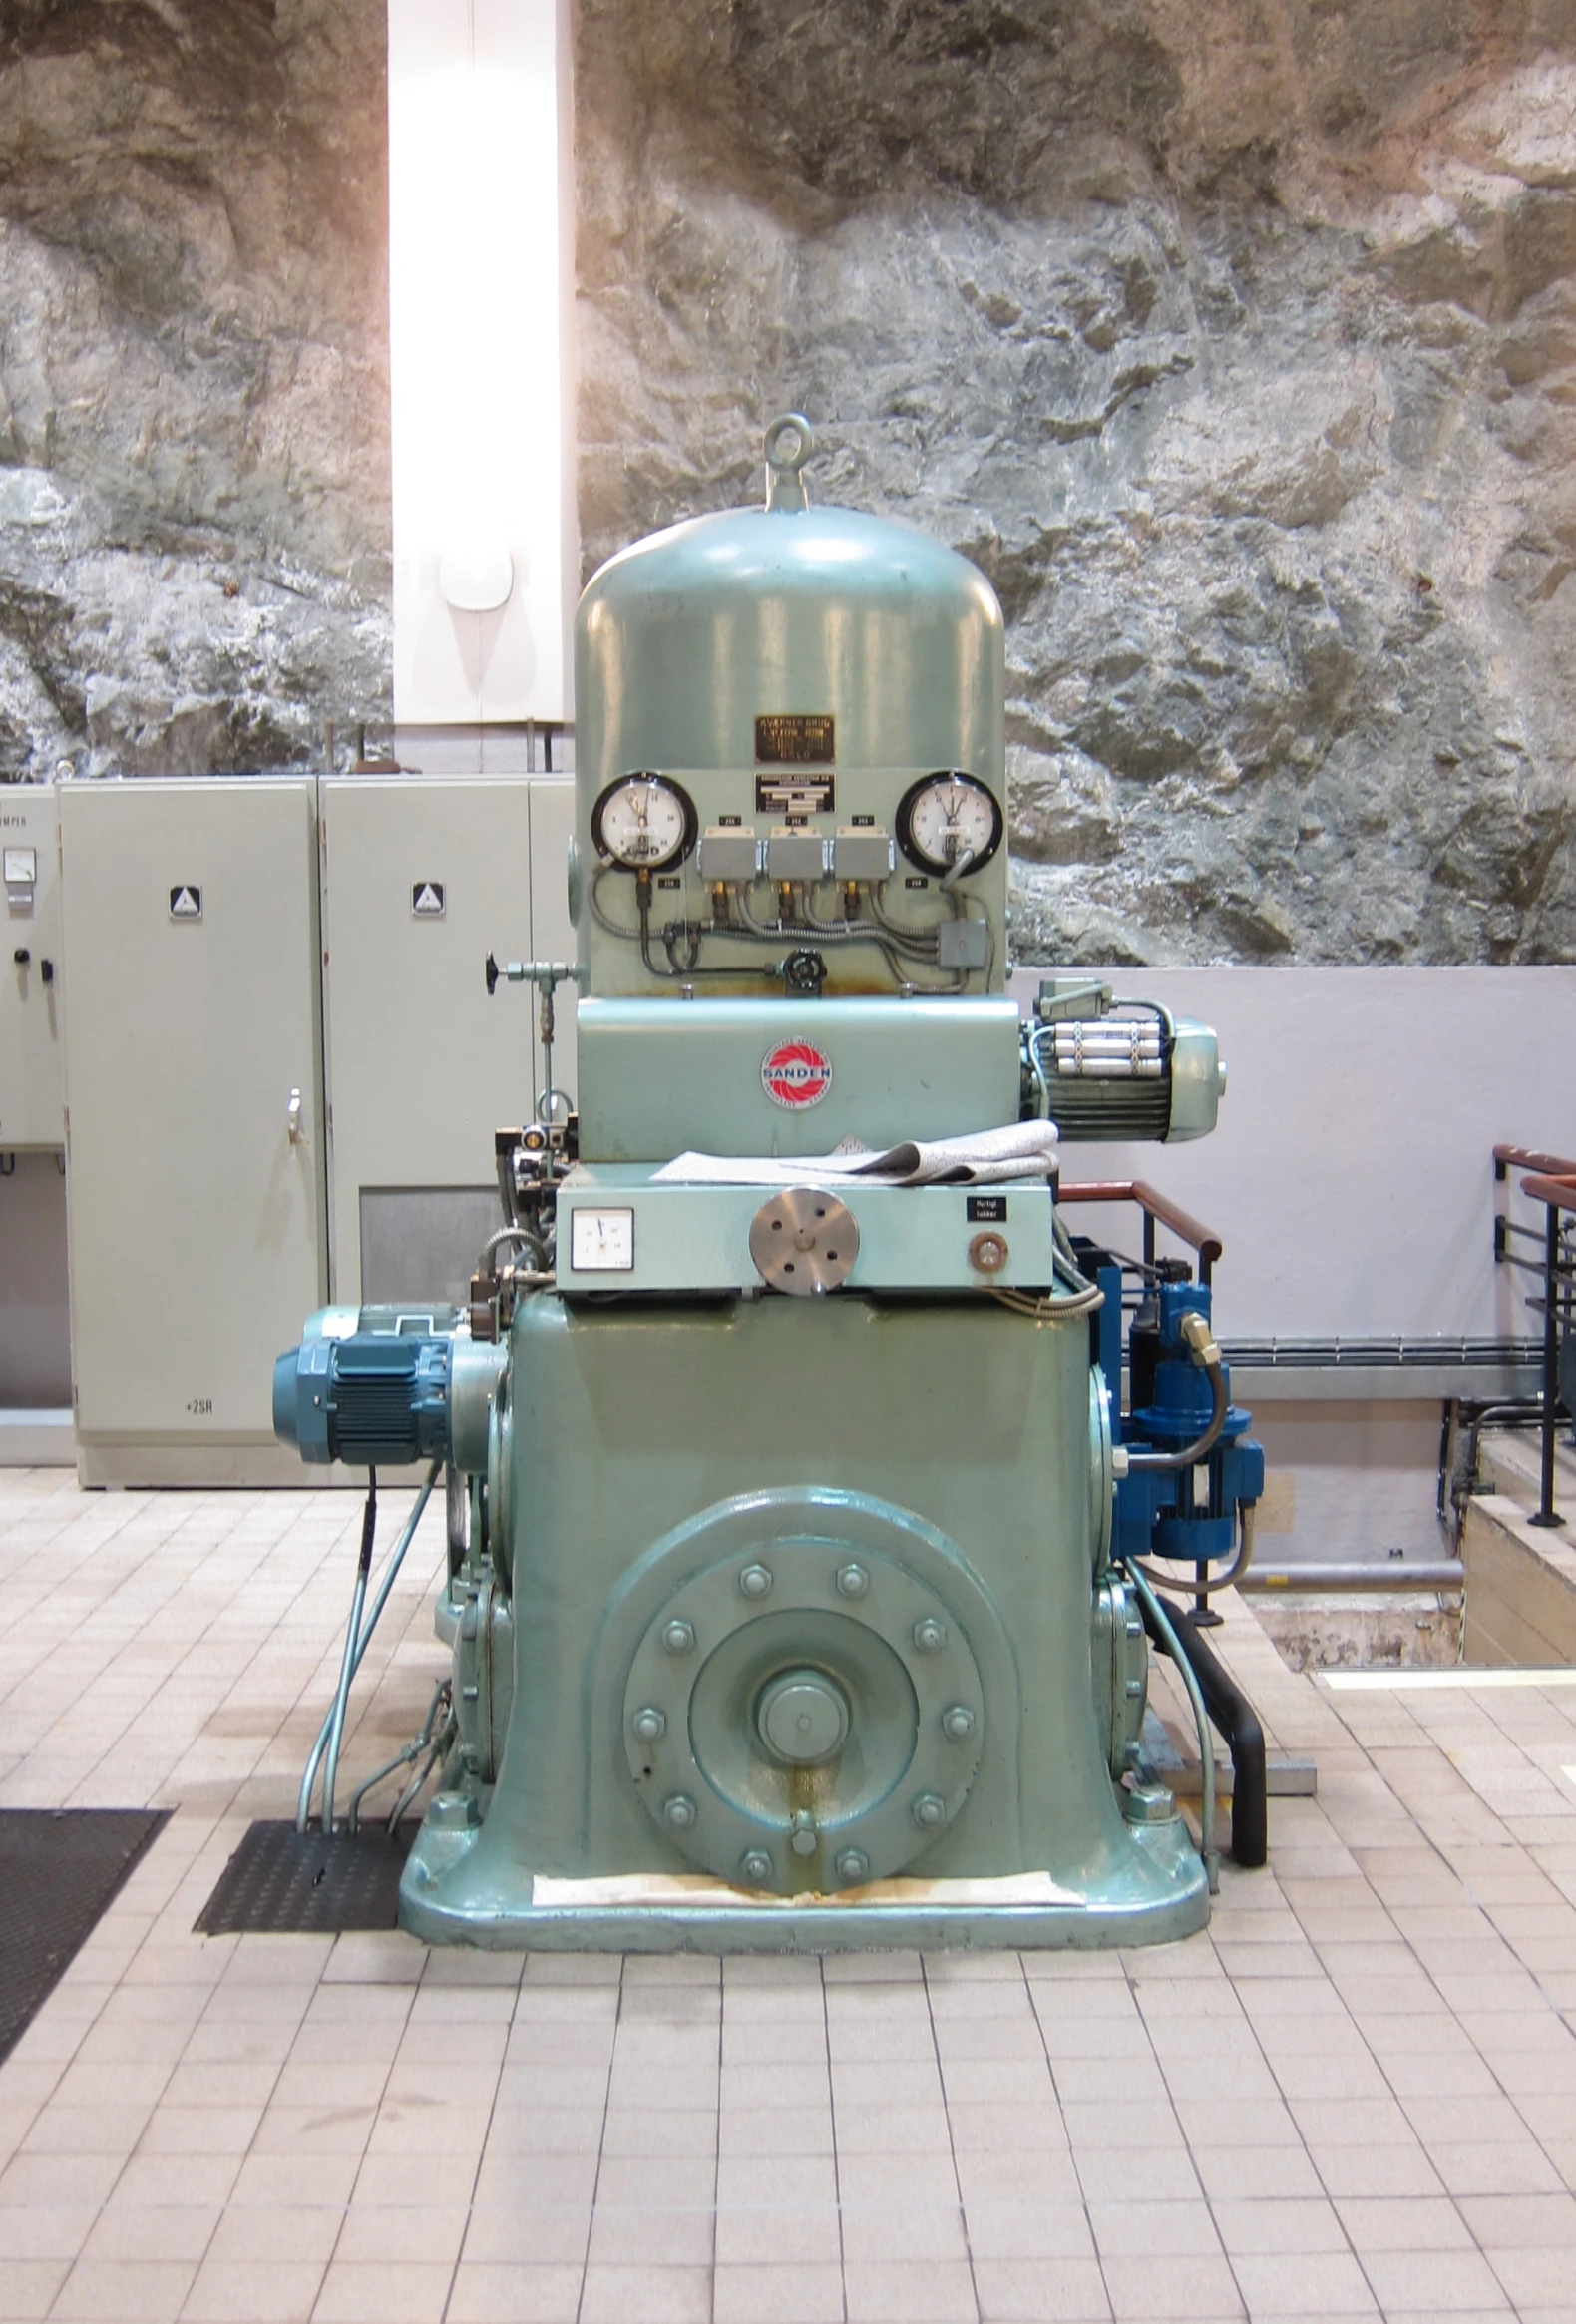 an industrial mechanical machine on display inside a building